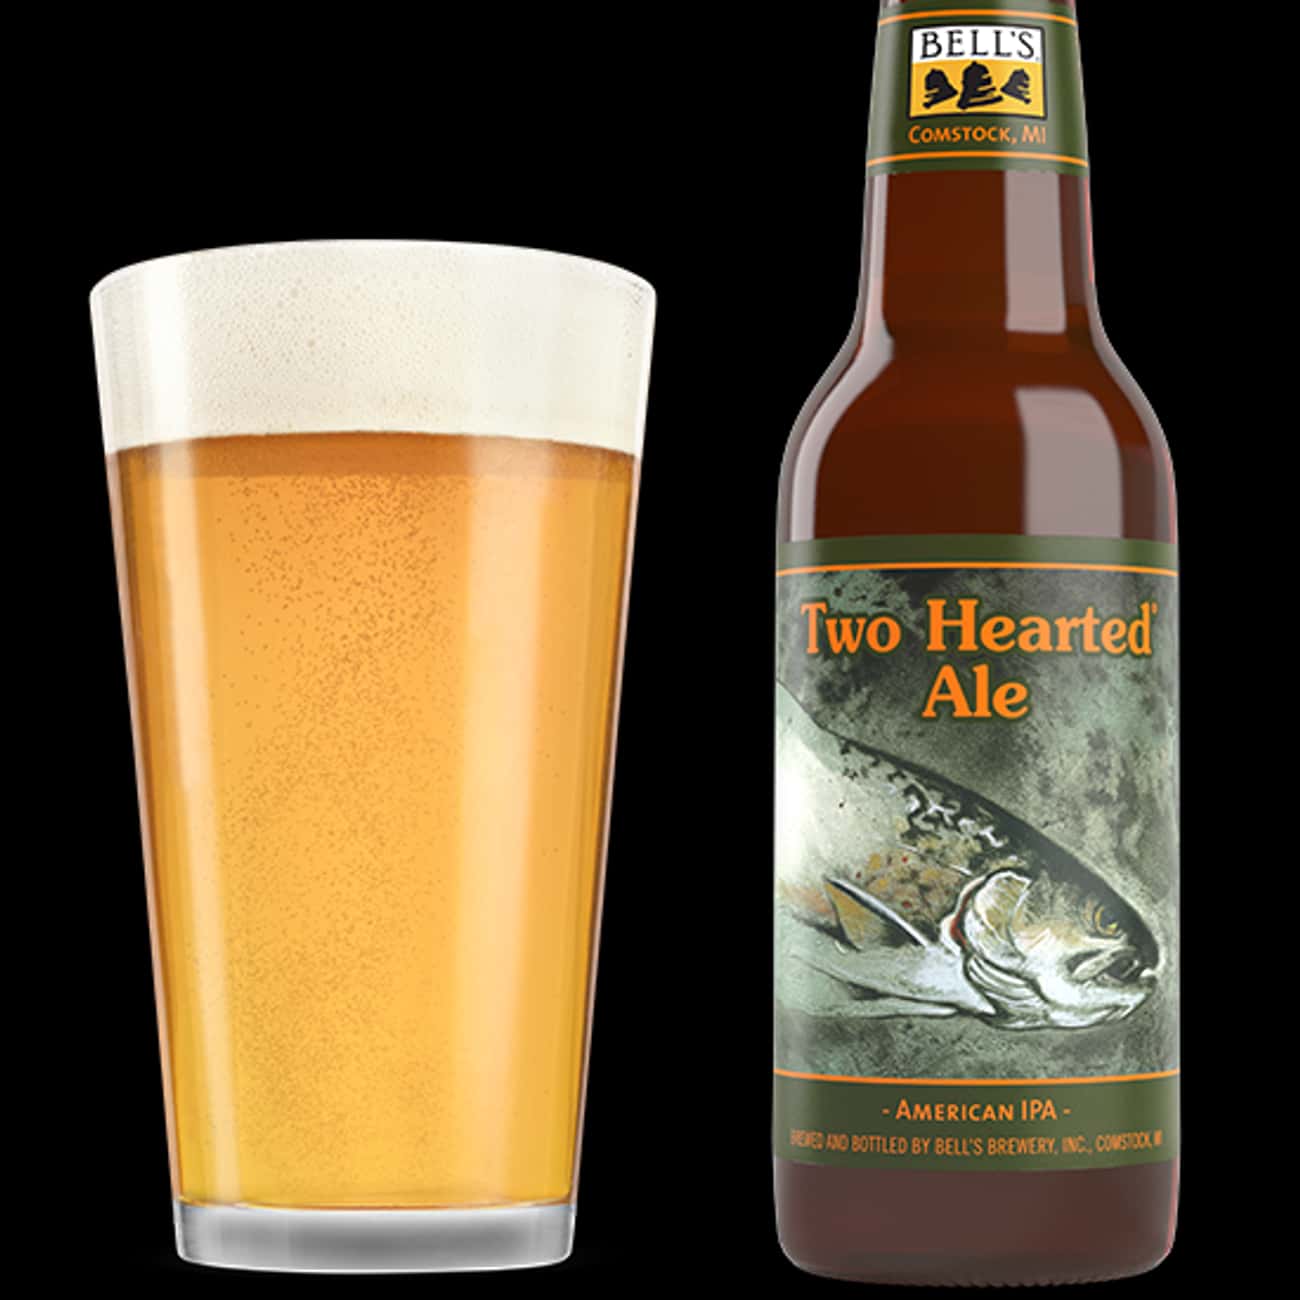 Two Hearted IPA